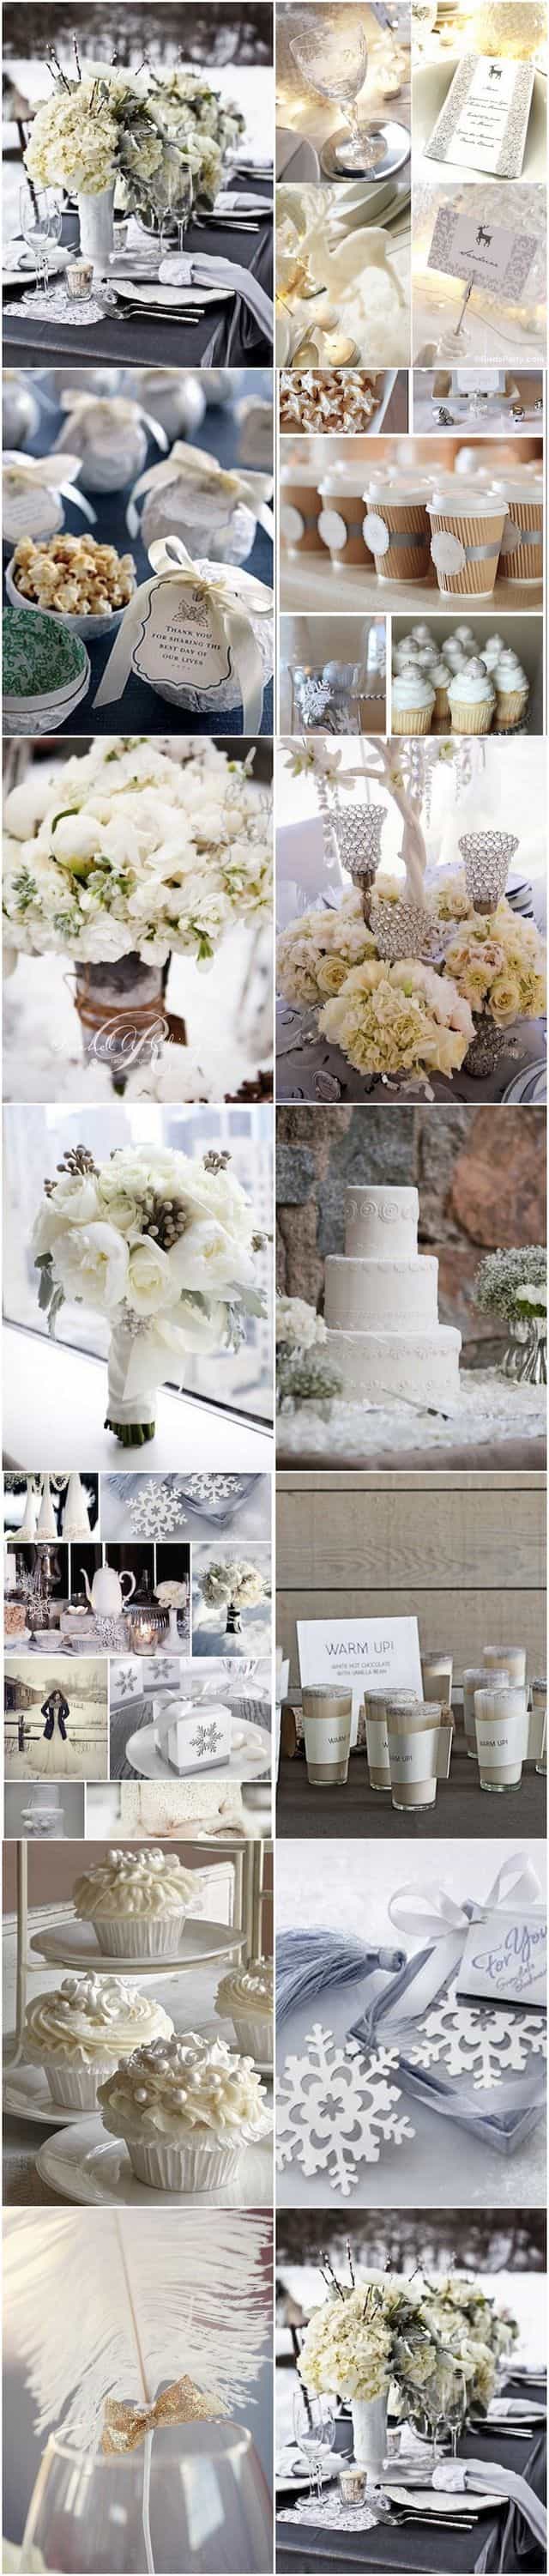 inspiration mariage hiver